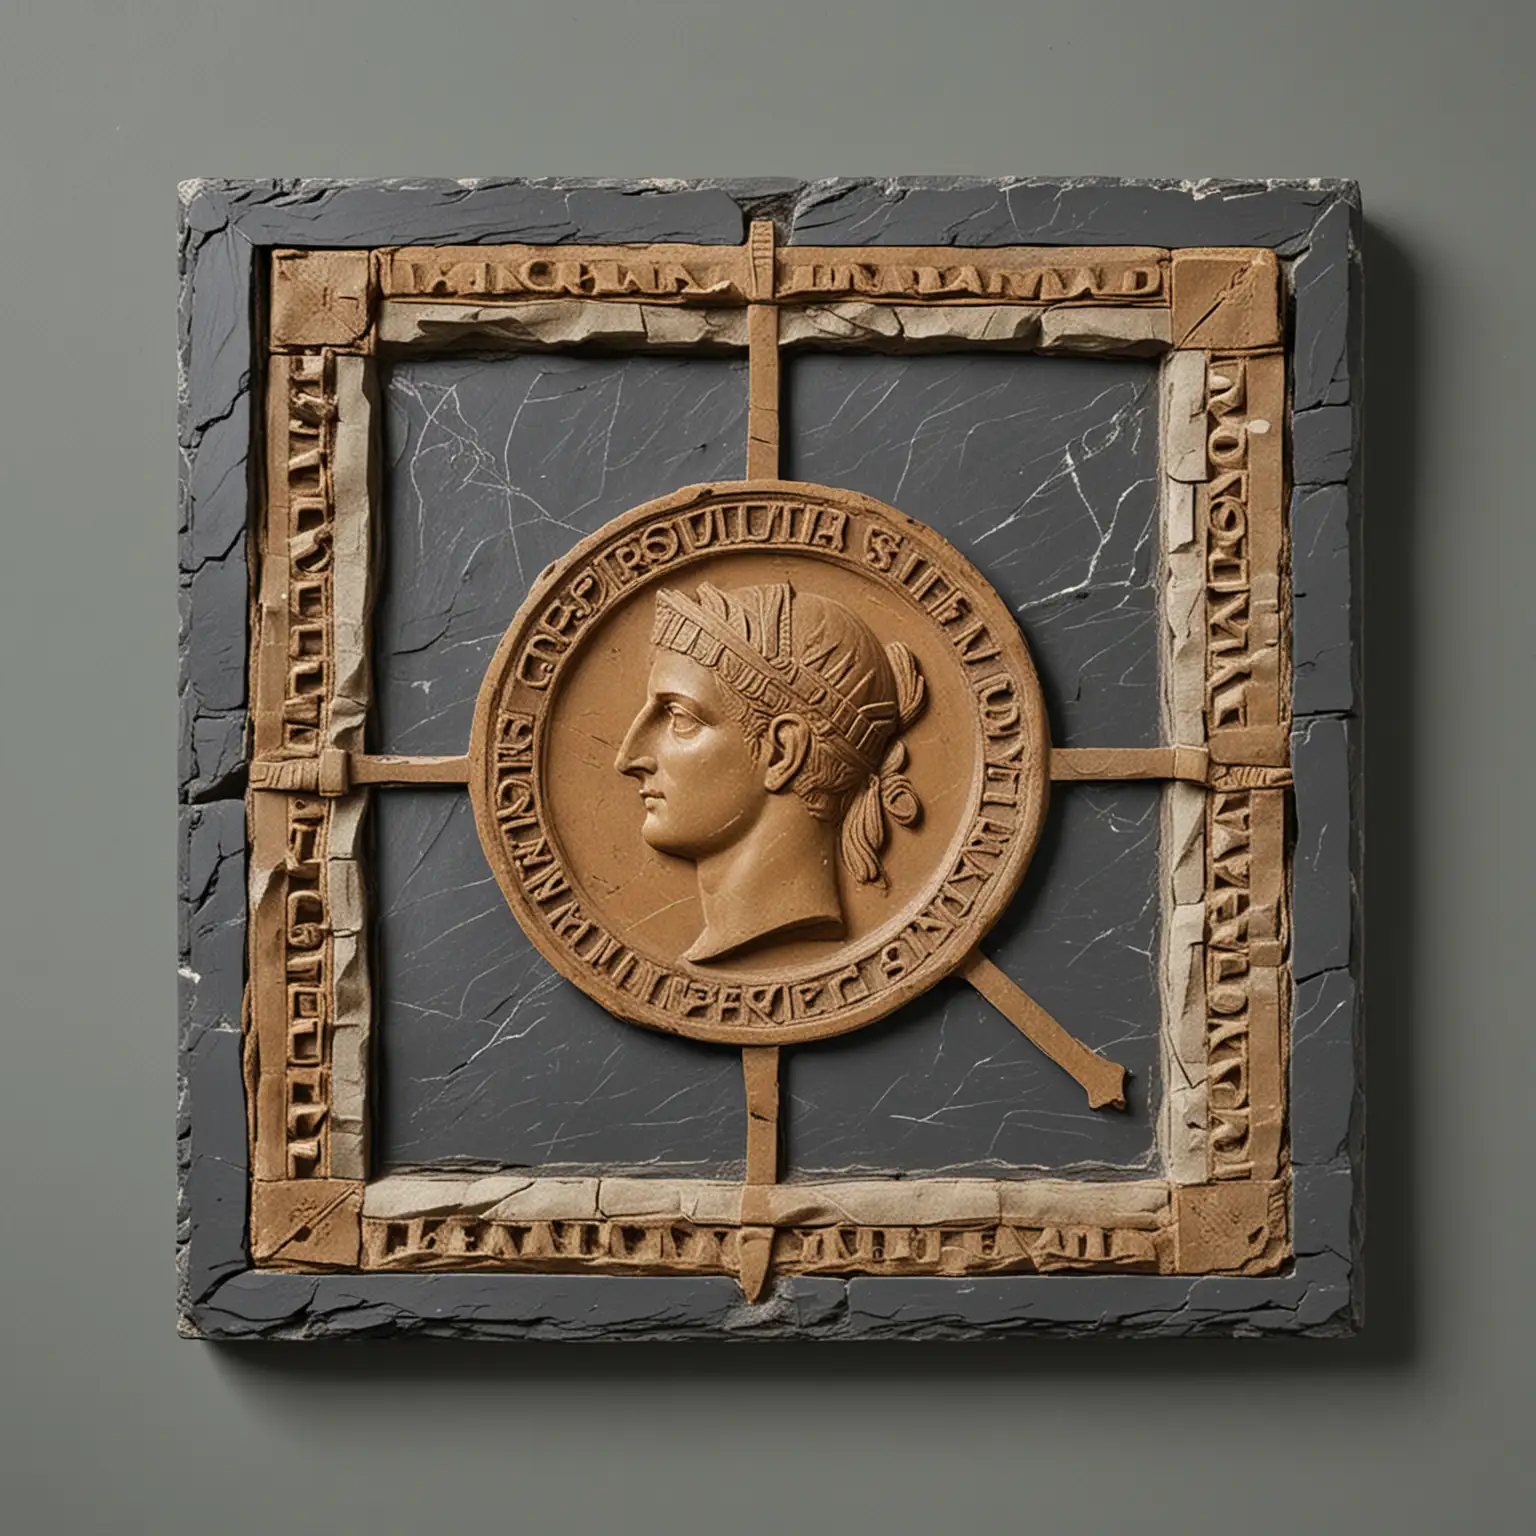 Pictorial Sign with Slate Background Featuring Roman SPQR Symbol in Square Surround